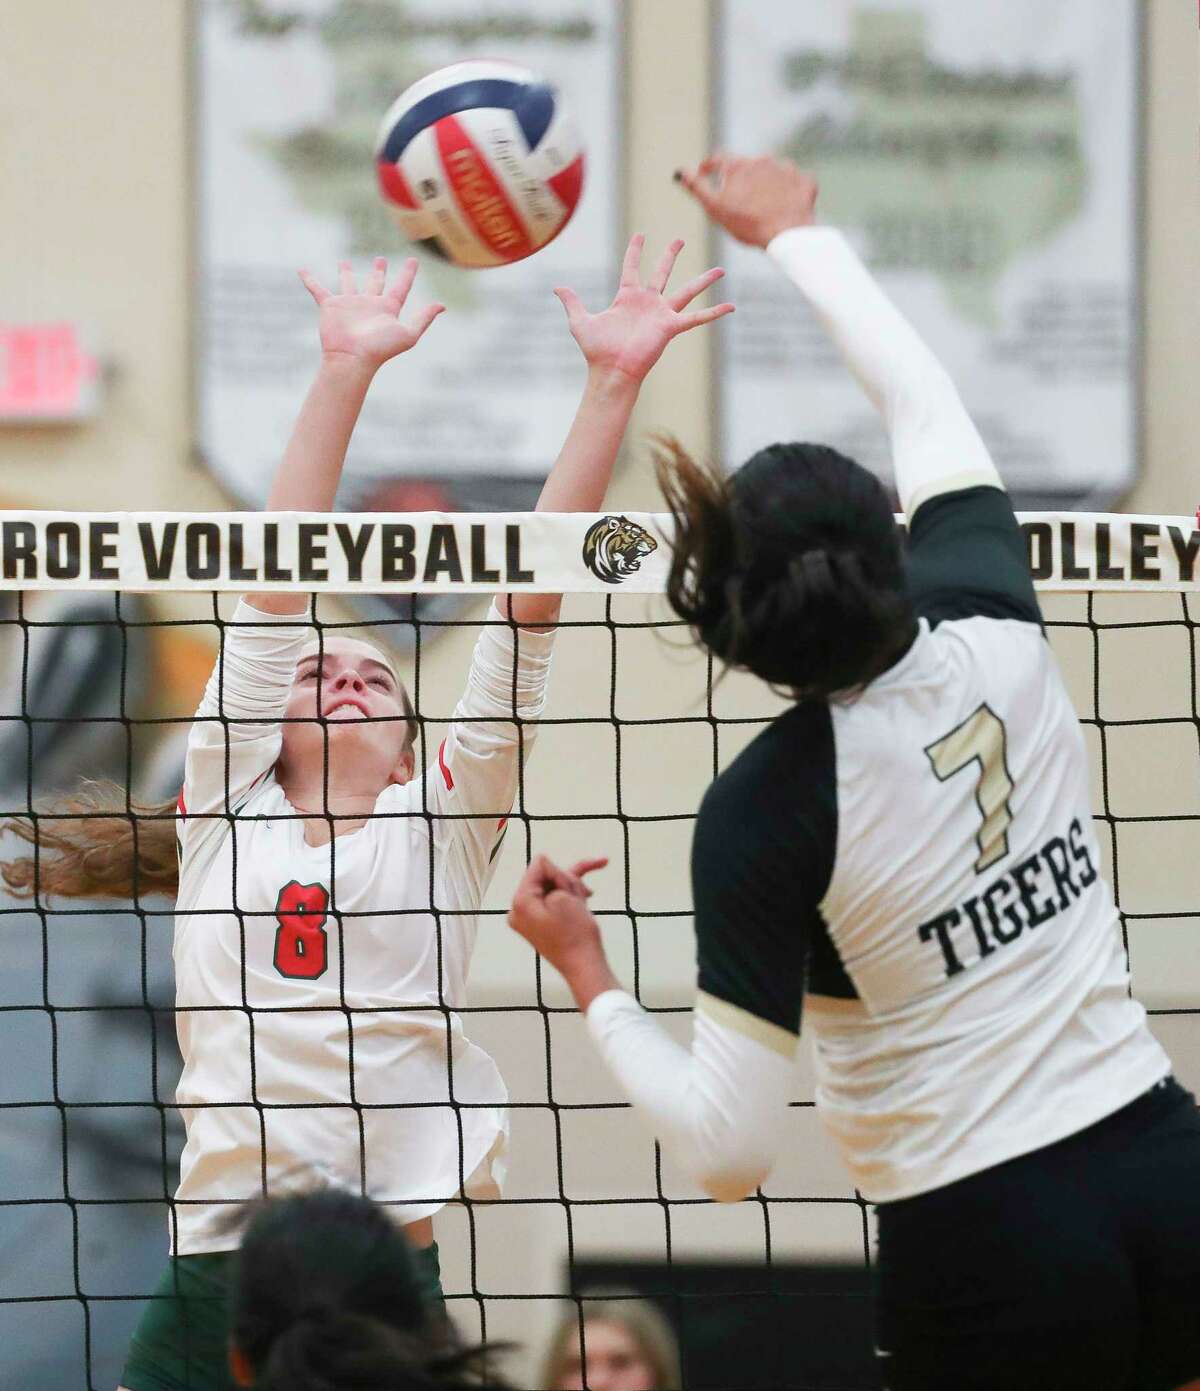 The Woodlands' Makenzie Weddel (8) blocks a shot by Conroe’s Kendall Glover (7) in the first set of a District 13-6A high school volleyball match at Conroe High School, Tuesday, Oct. 4, 2022, in Conroe.